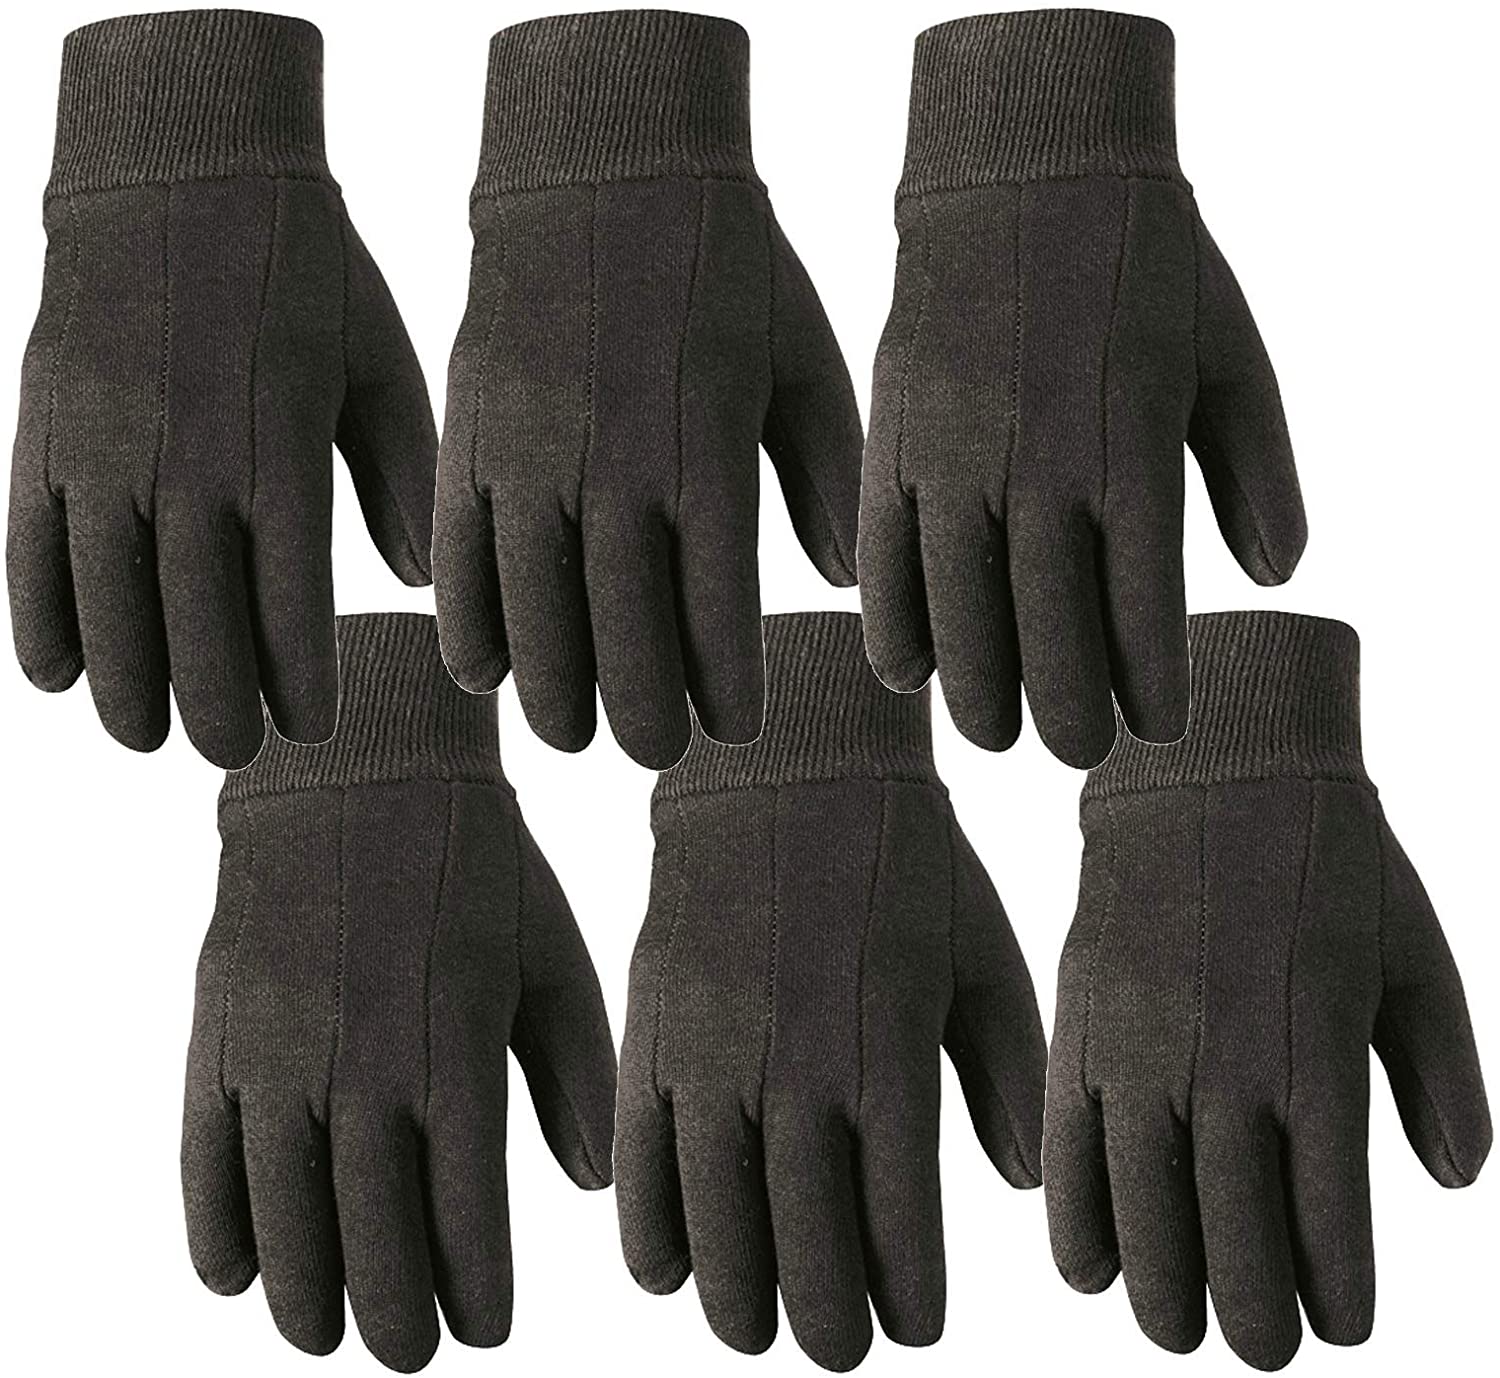 6-Pairs of Wells Lamont Cotton Work & Gardening Gloves (Large) $3.75 & Free S&H w/ Prime or $25+